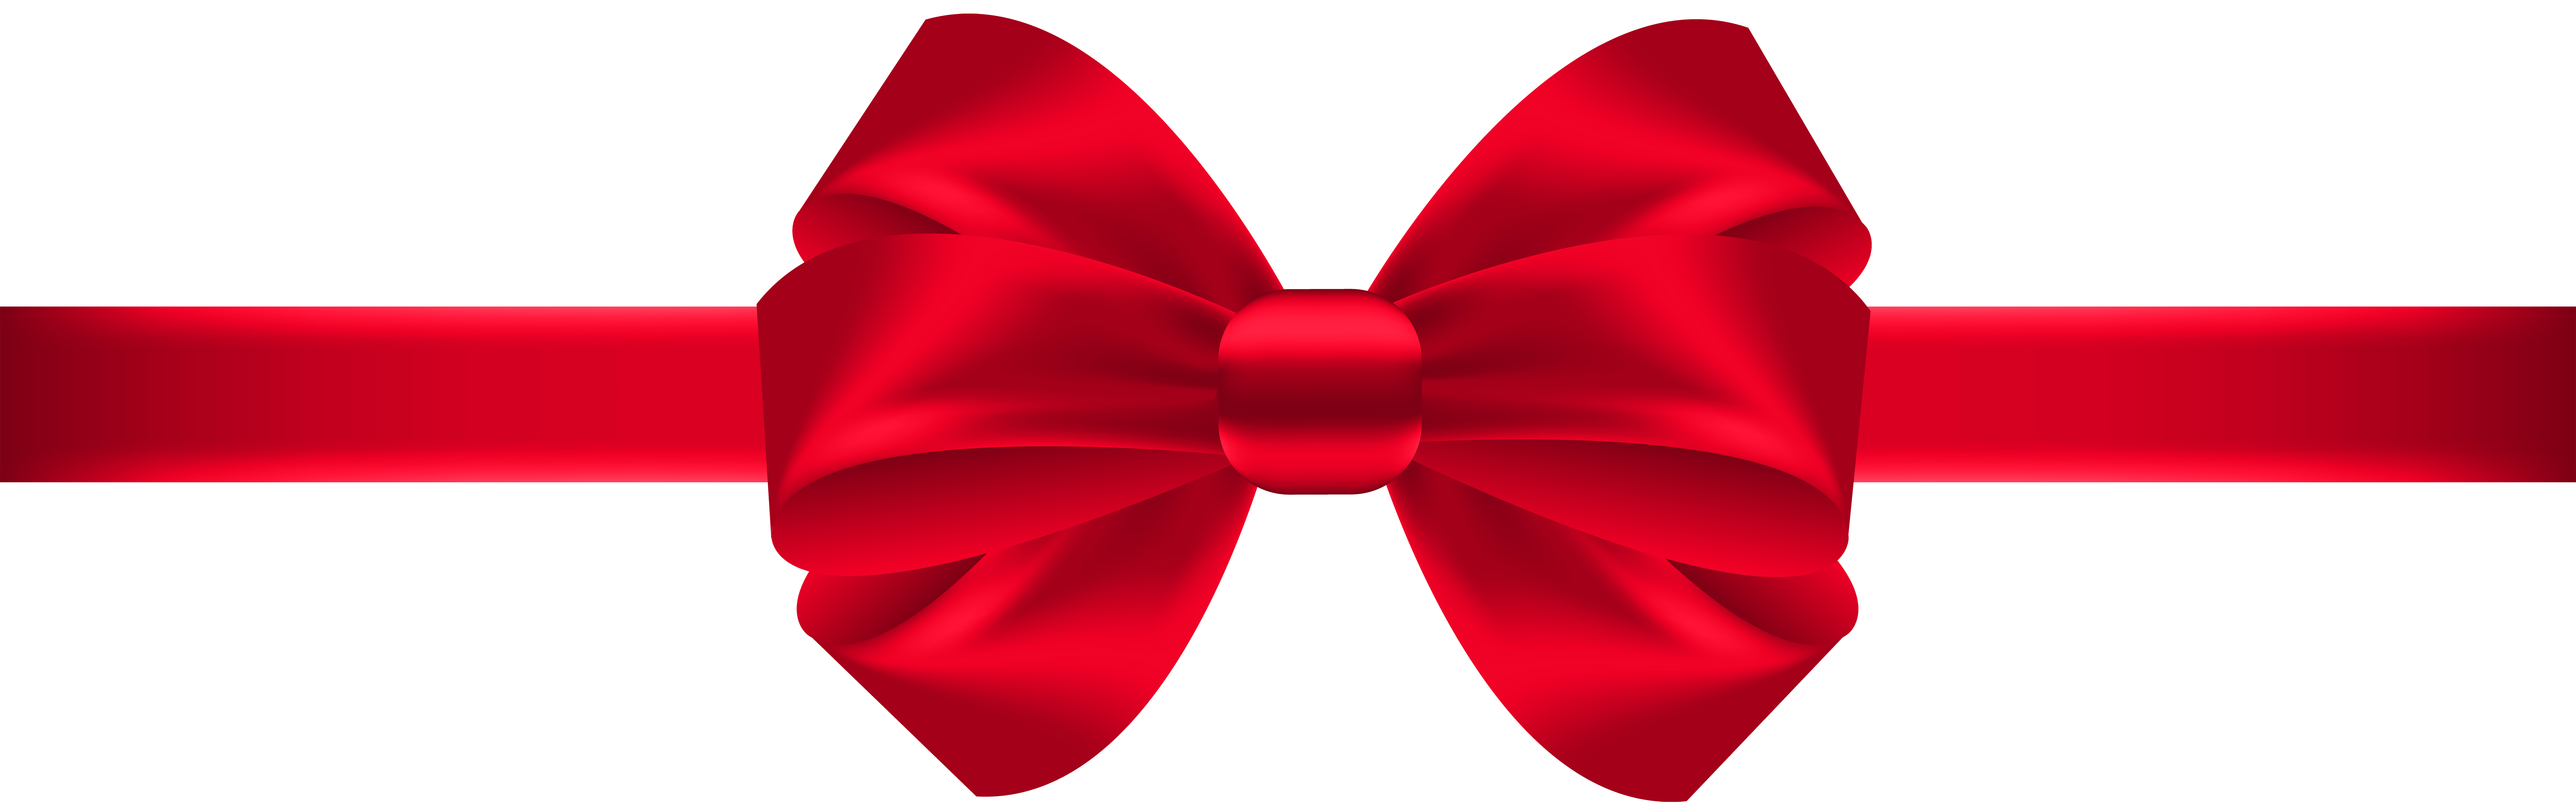 clipart bow holiday bow